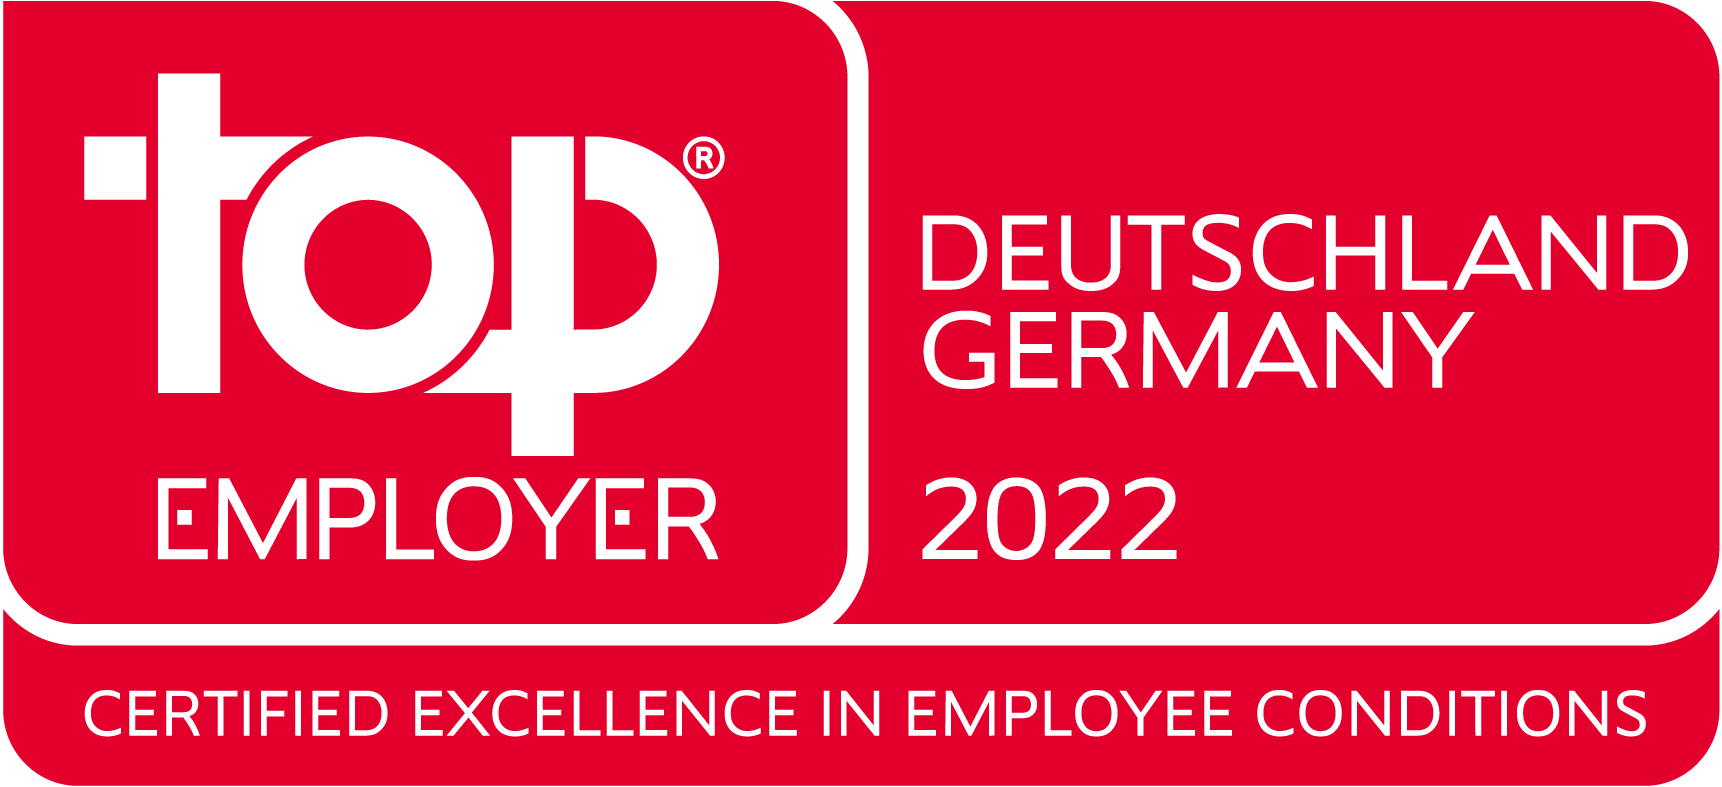 Germany 2022 Top Employer